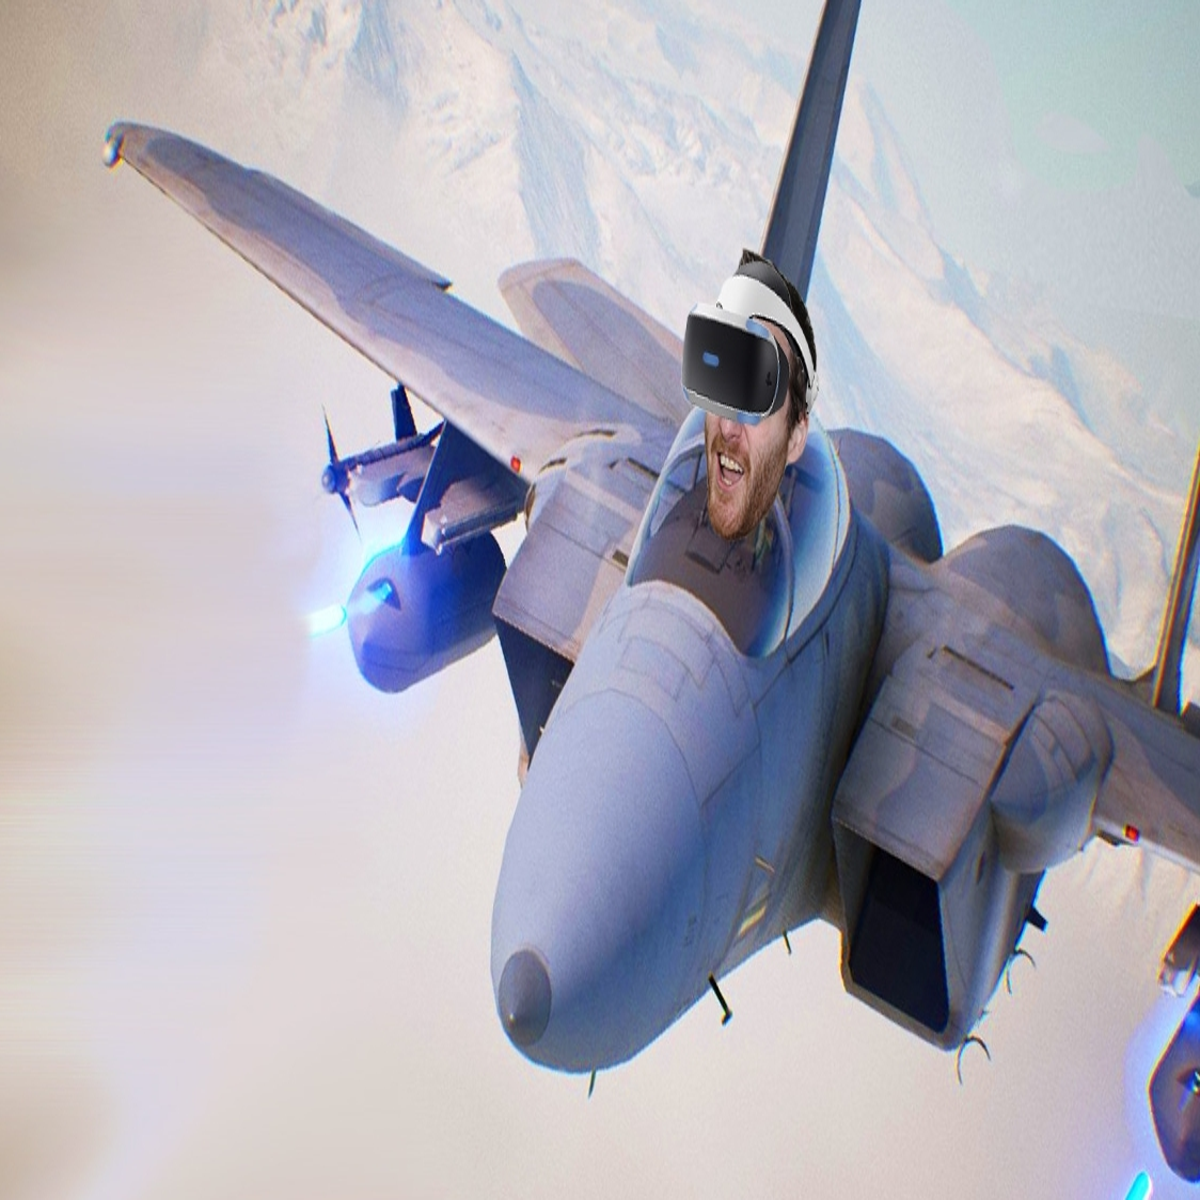 ACE COMBAT 7: SKIES UNKNOWN PS4 PS5